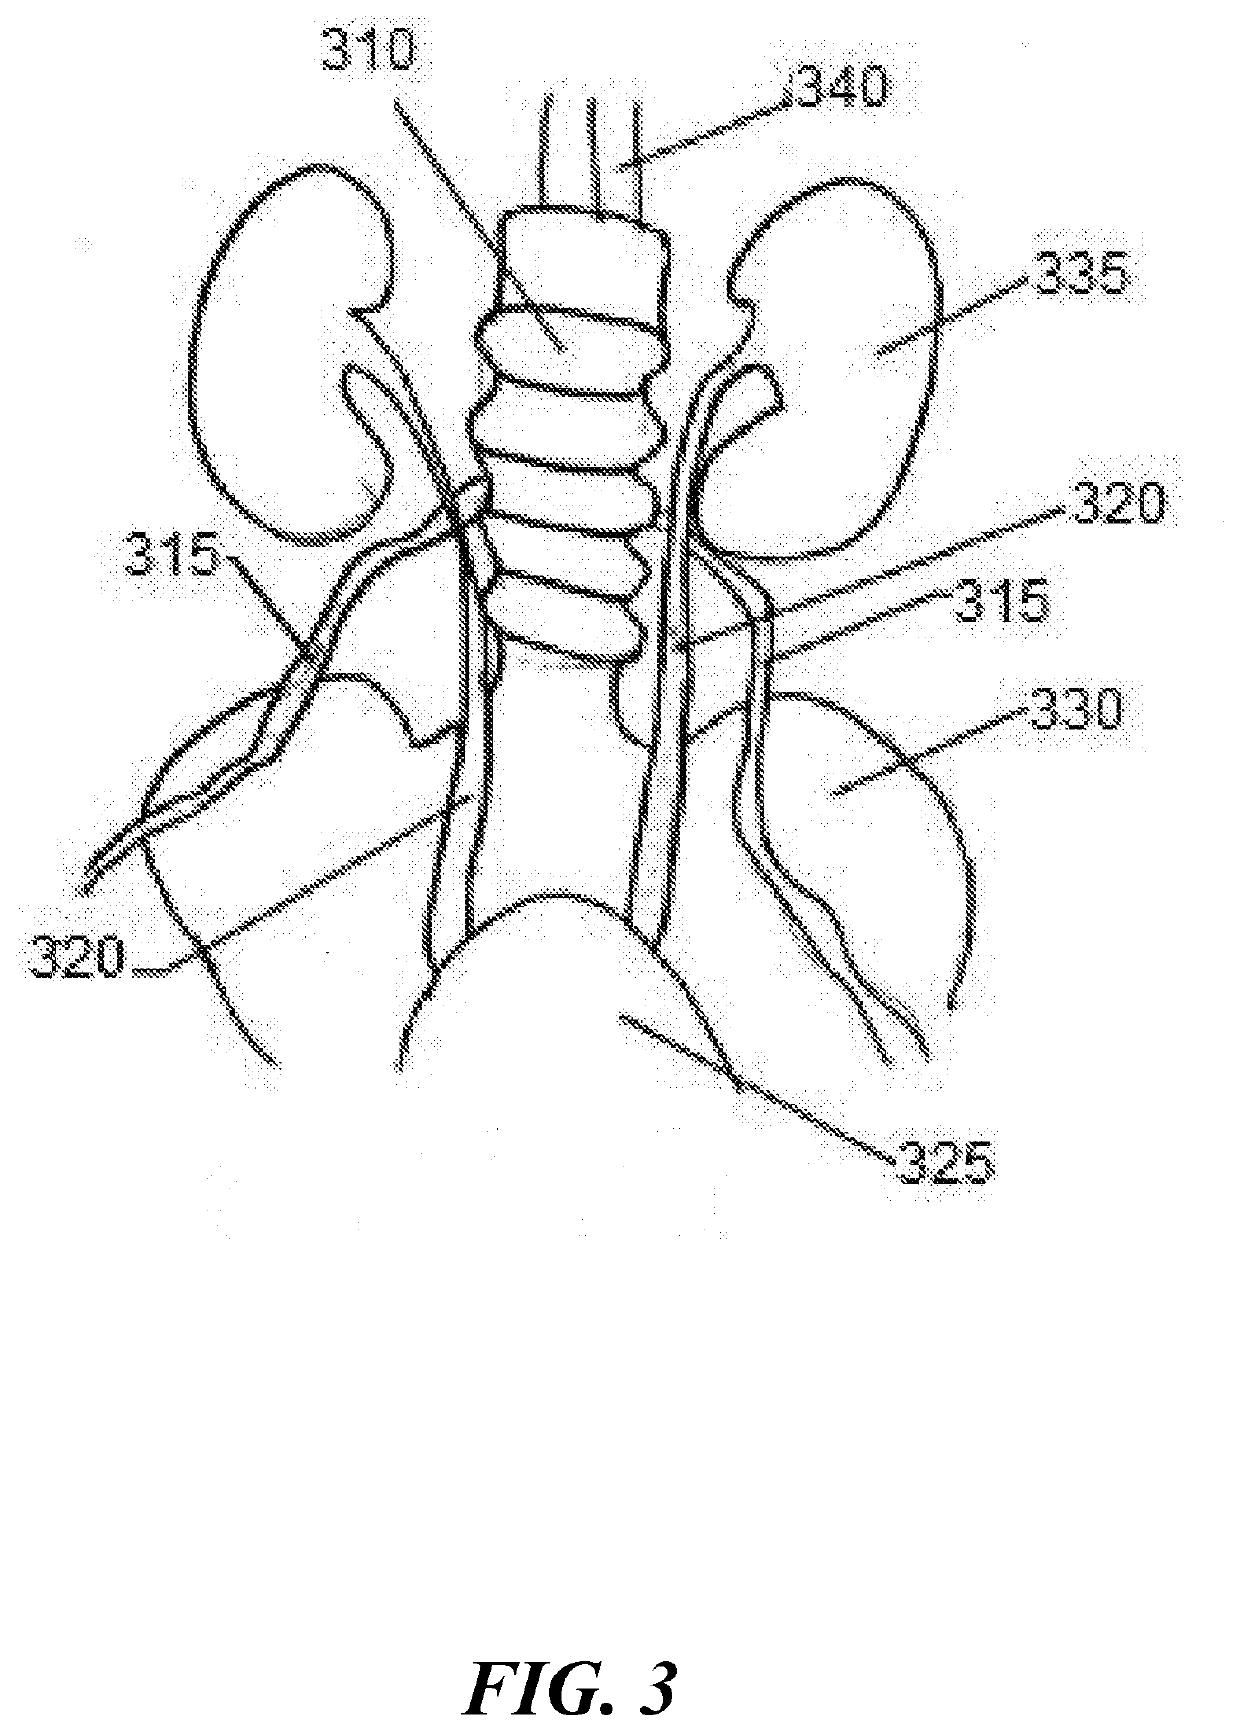 Tissue specific markers for preoperative and intraoperative localization and visualization of tissue